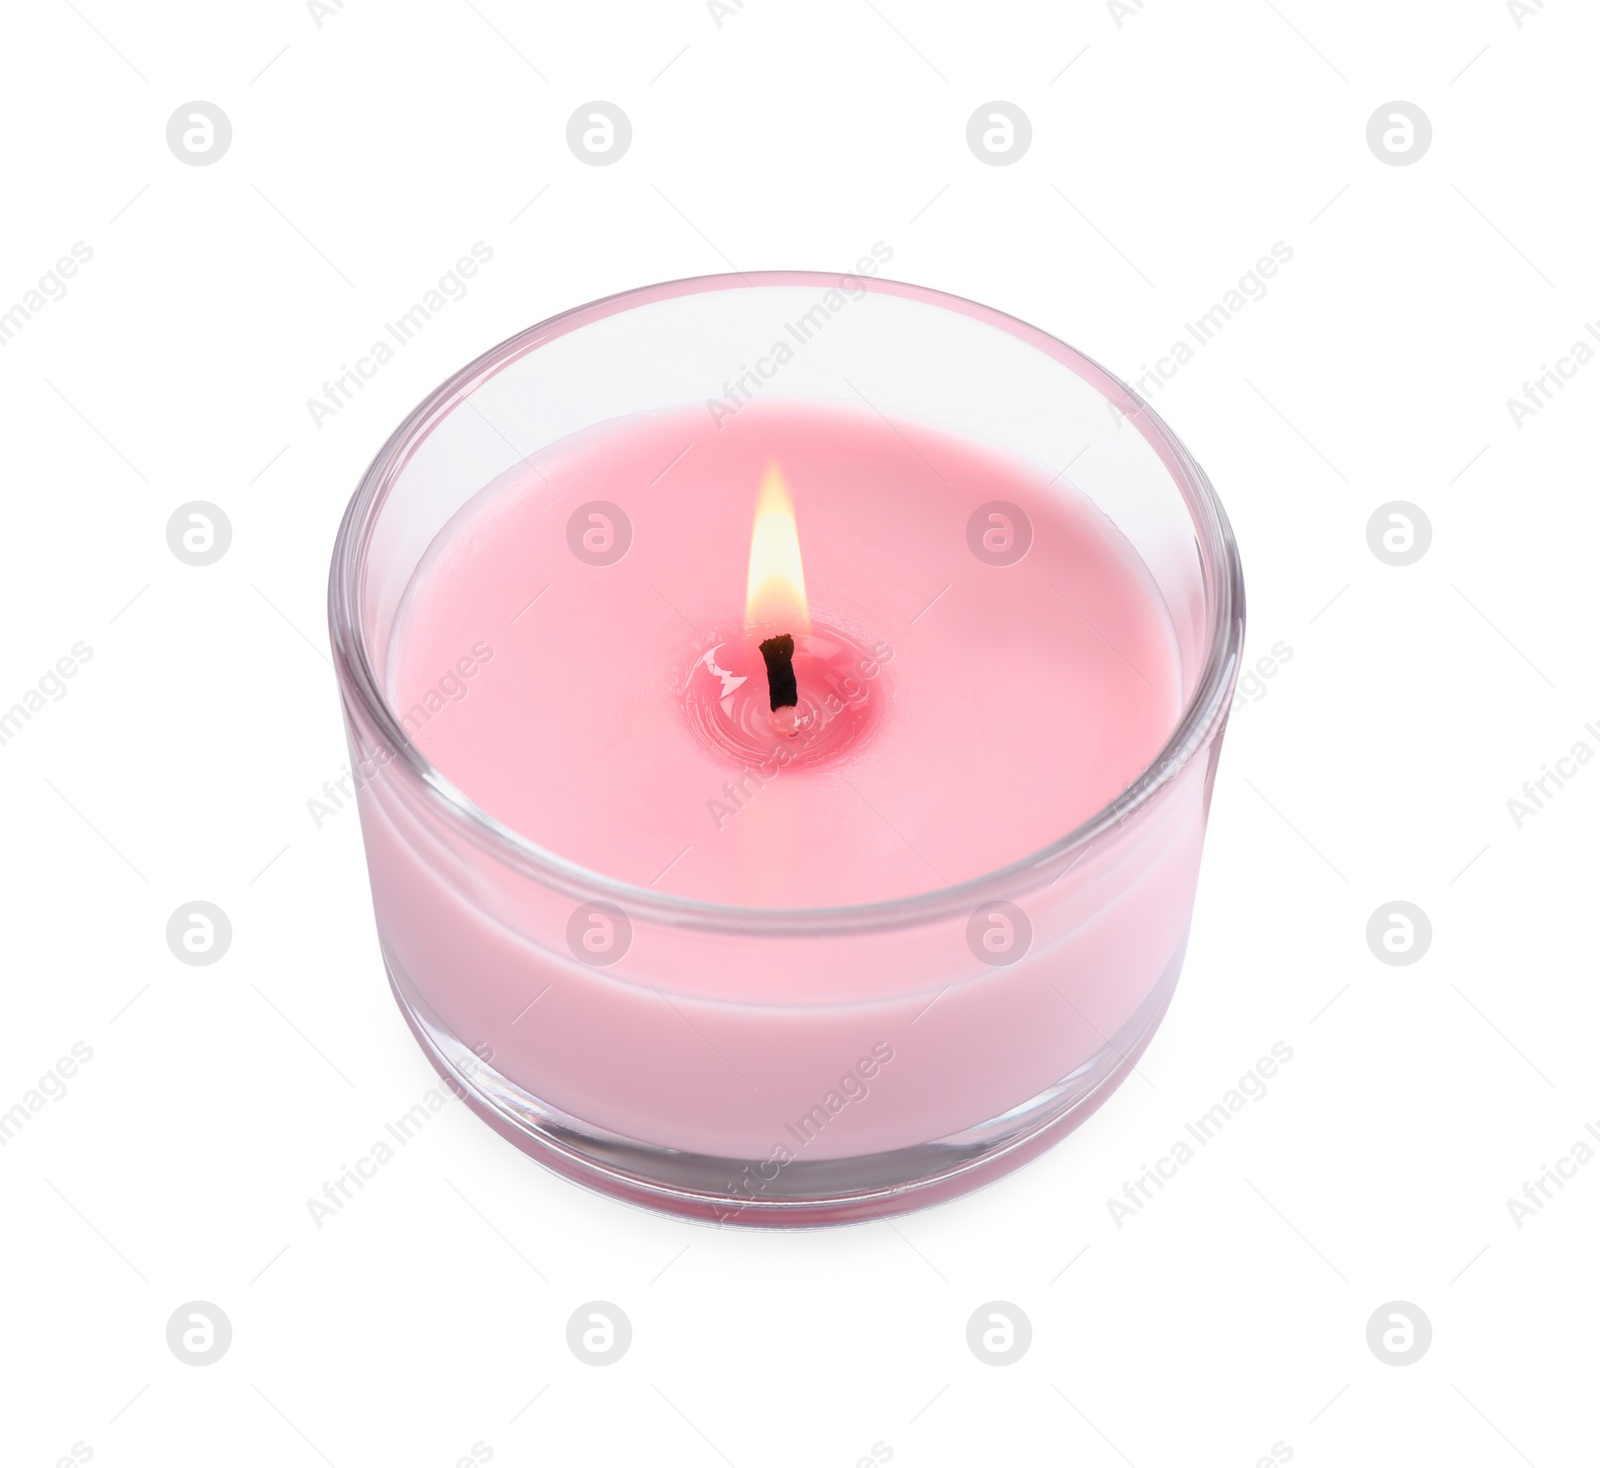 Photo of Burning candle in glass holder isolated on white